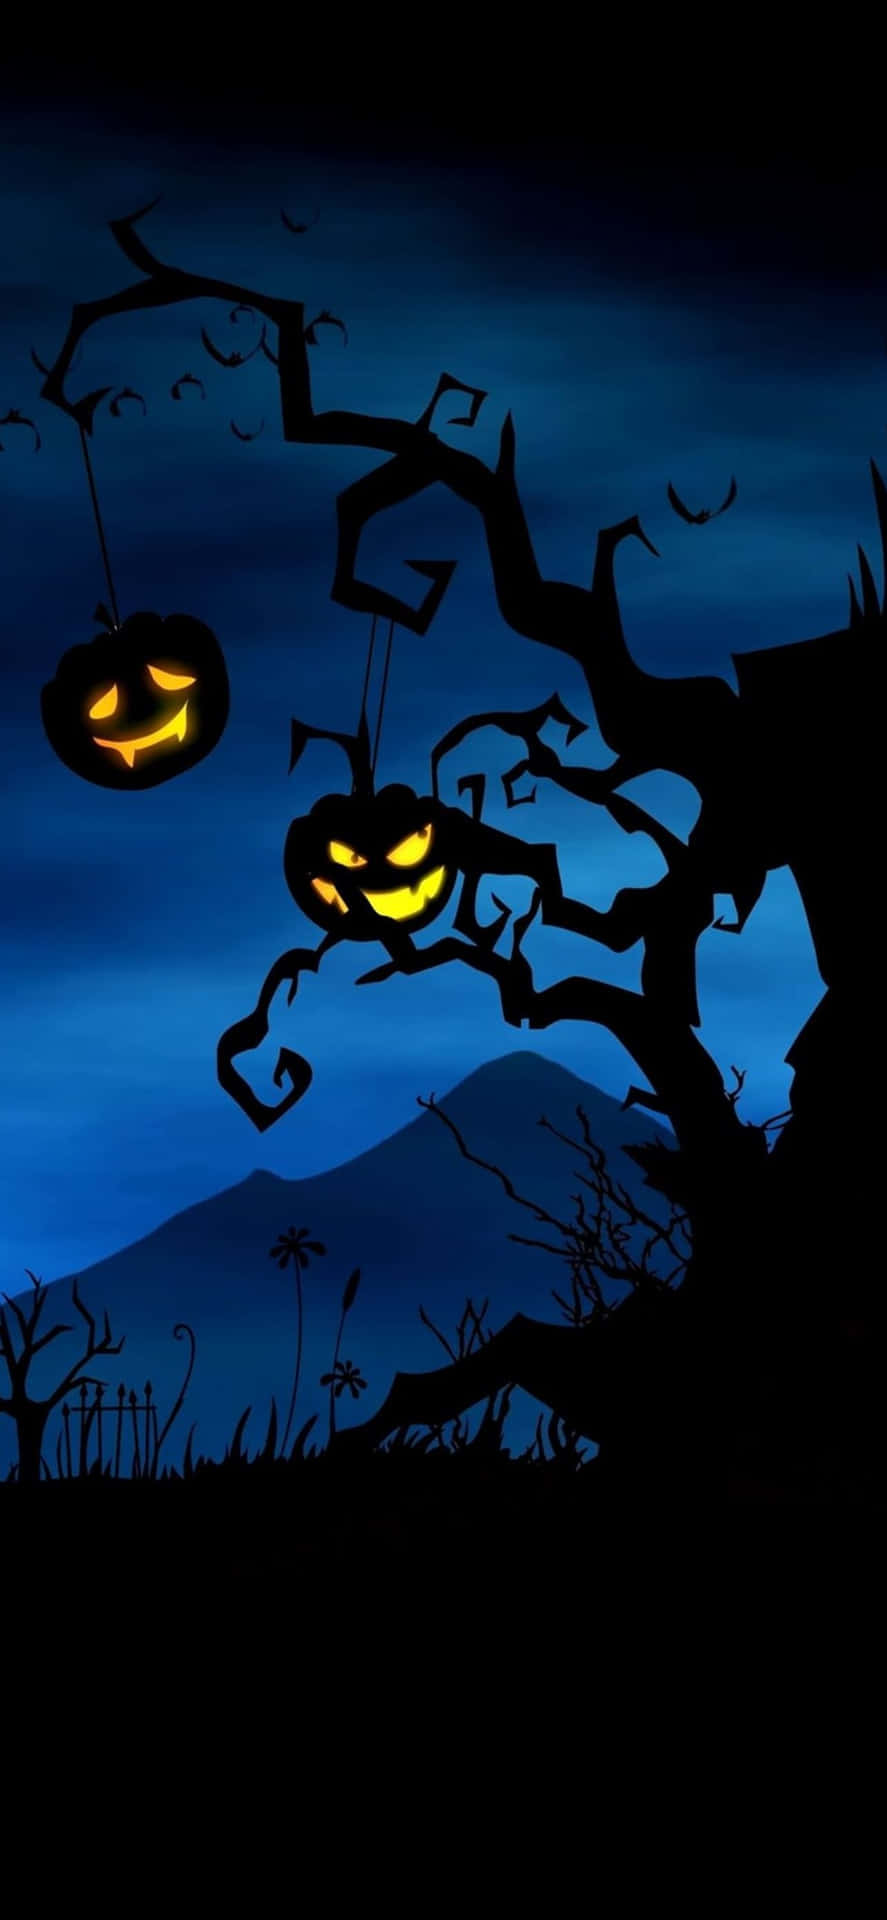 Get ready to have a spook-tacular October with this halloween themed iPhone wallpaper